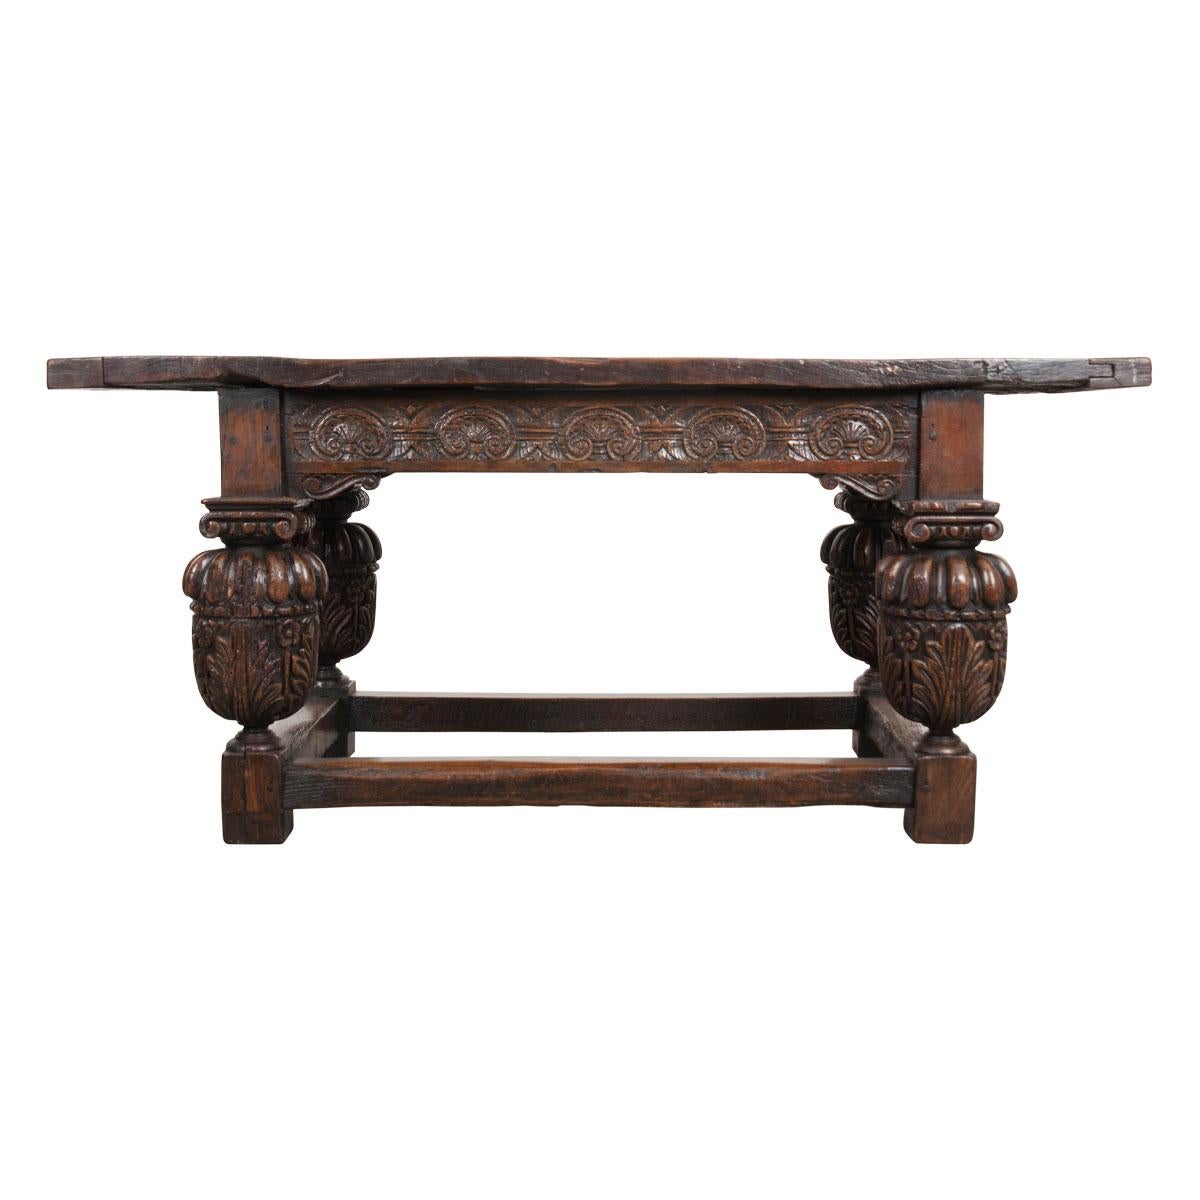 Spanish Early 19th Century Oak Refectory Table